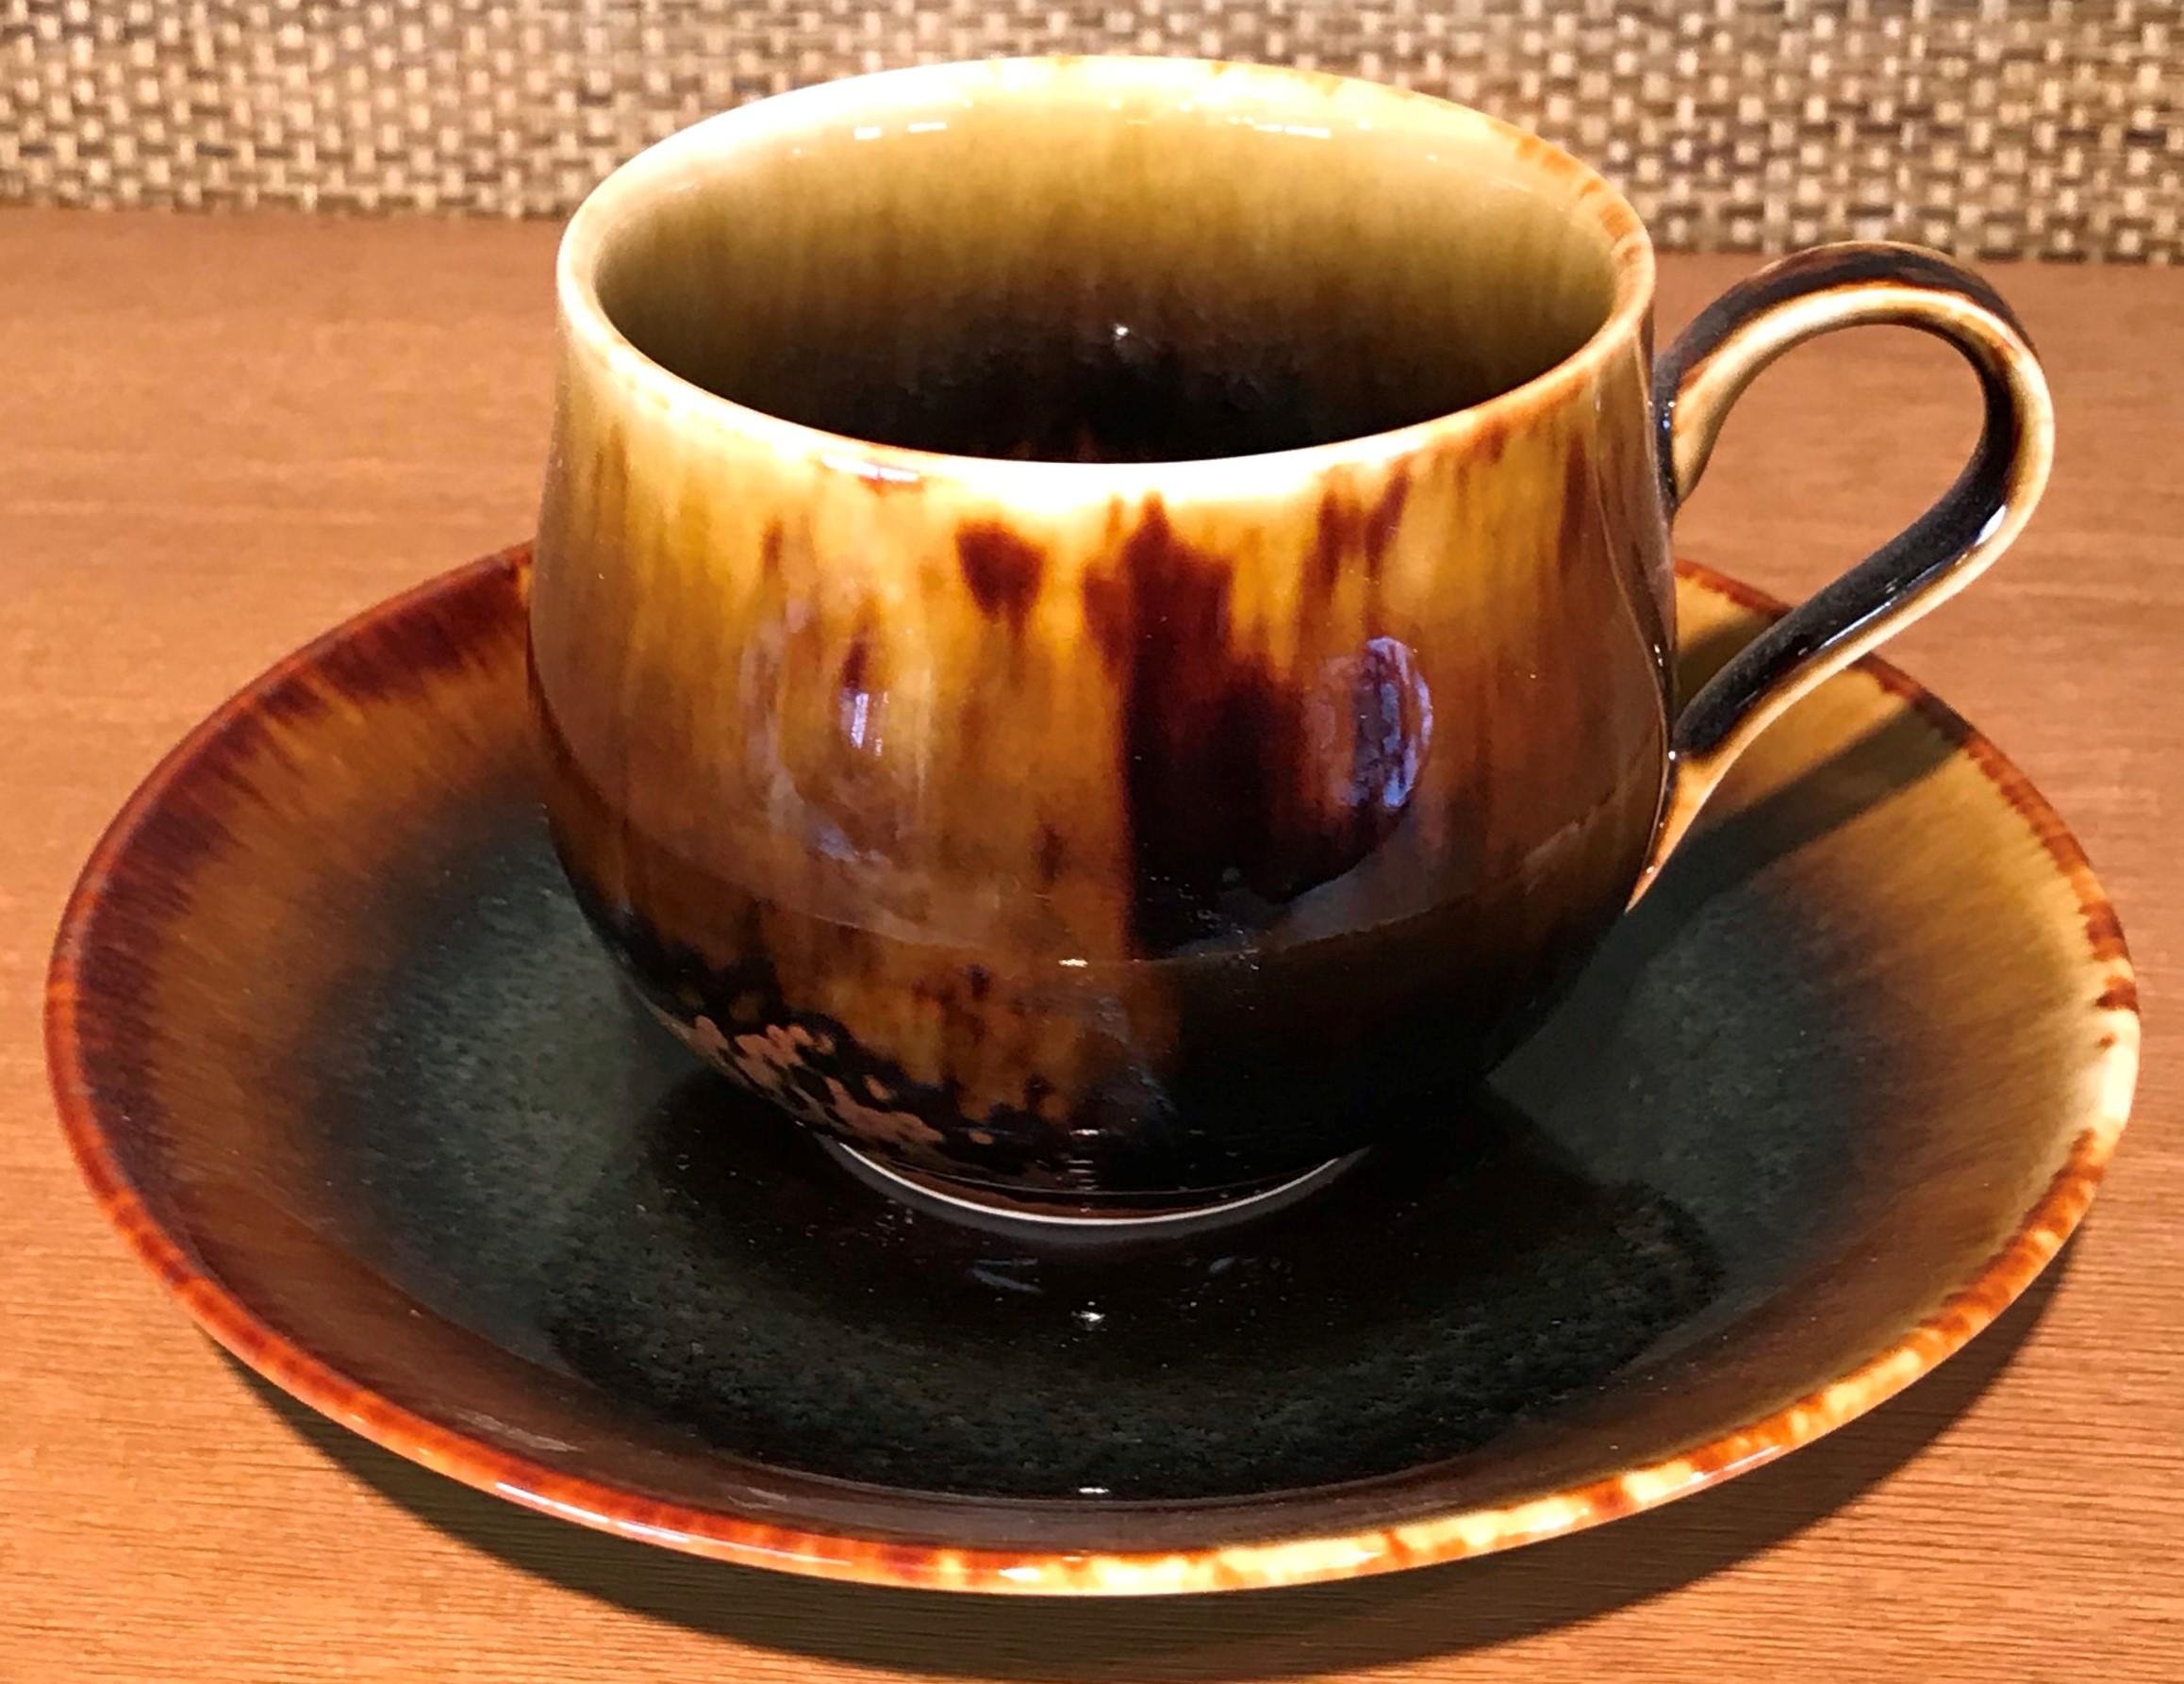 Japanese Turquoise Hand-Glazed Porcelain Cup and Saucer by Master Artist 5